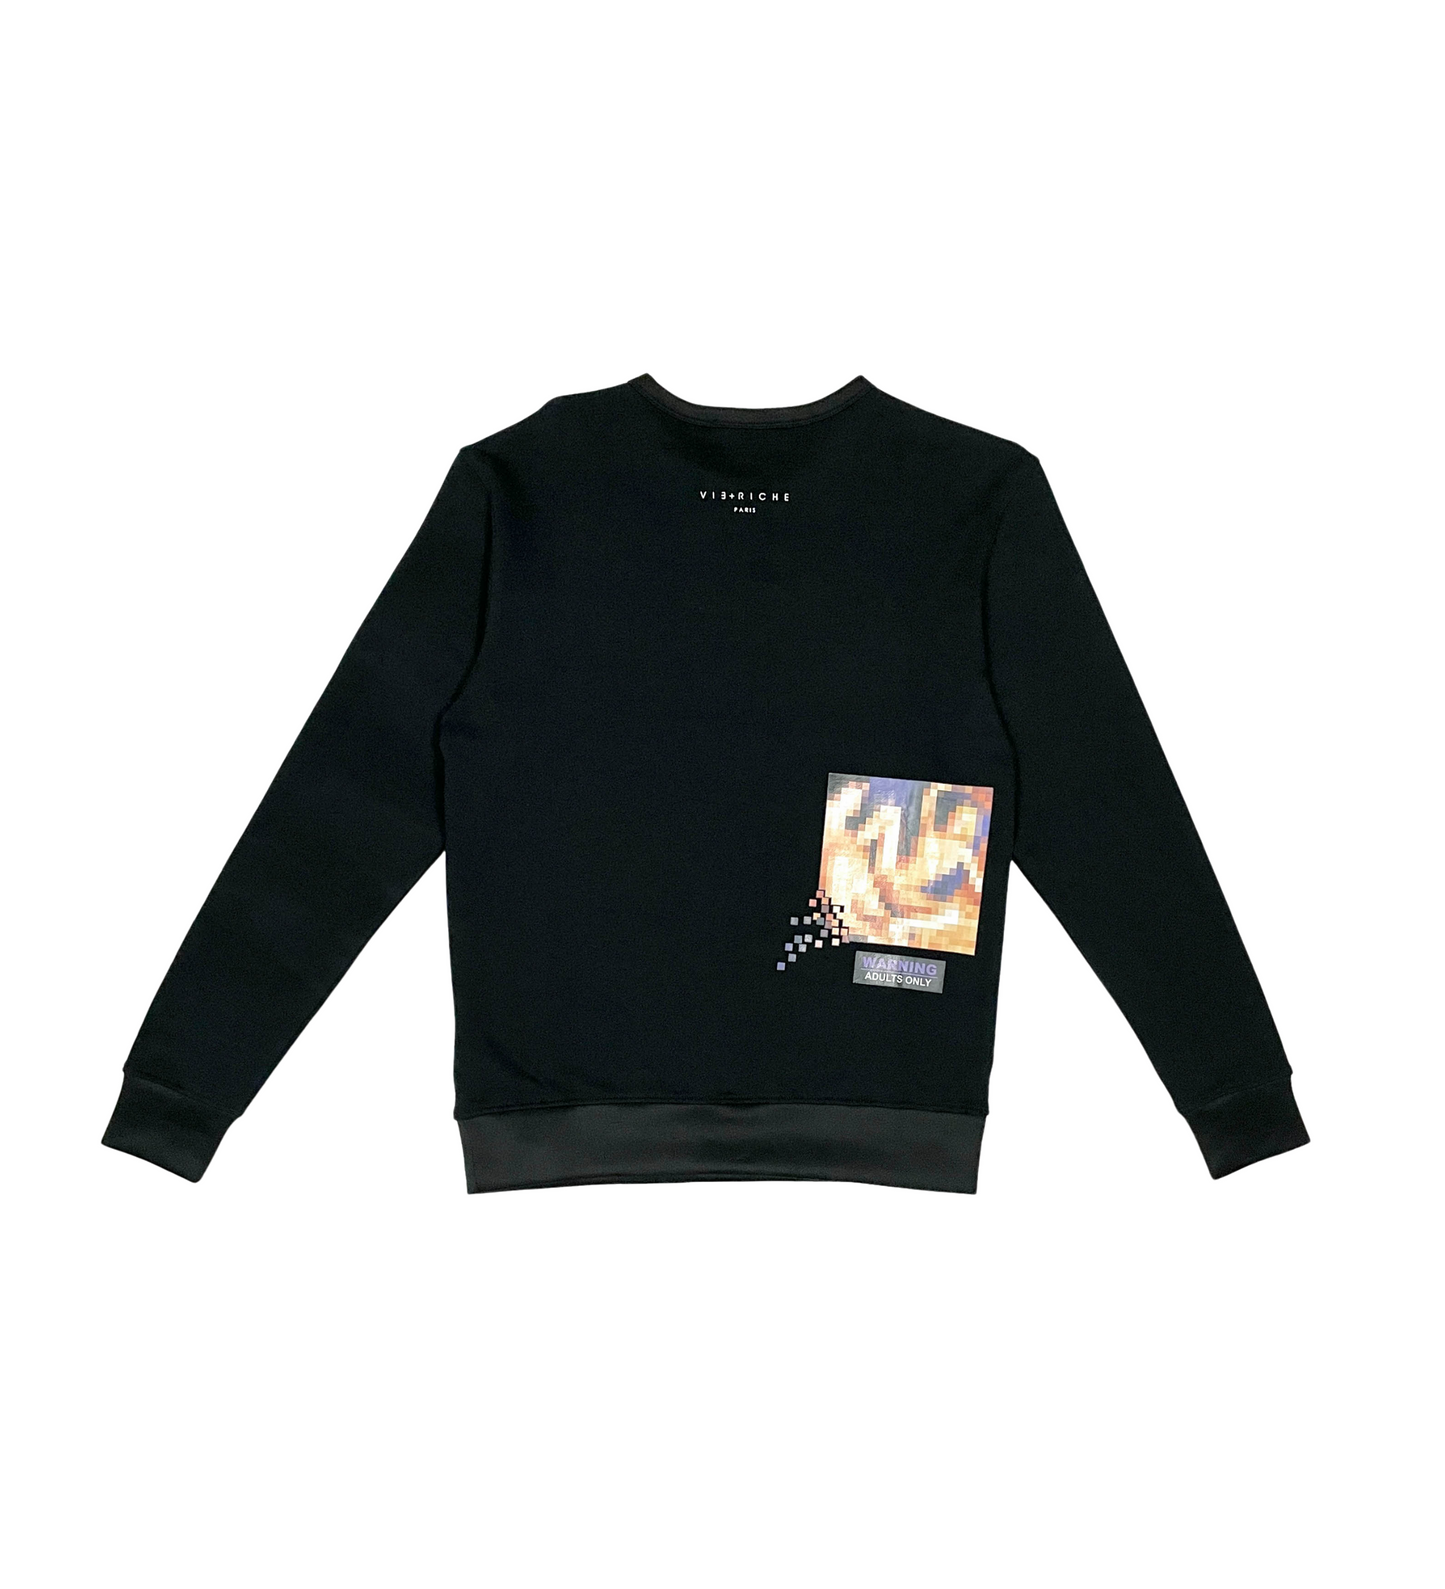 Adults Only Crewneck